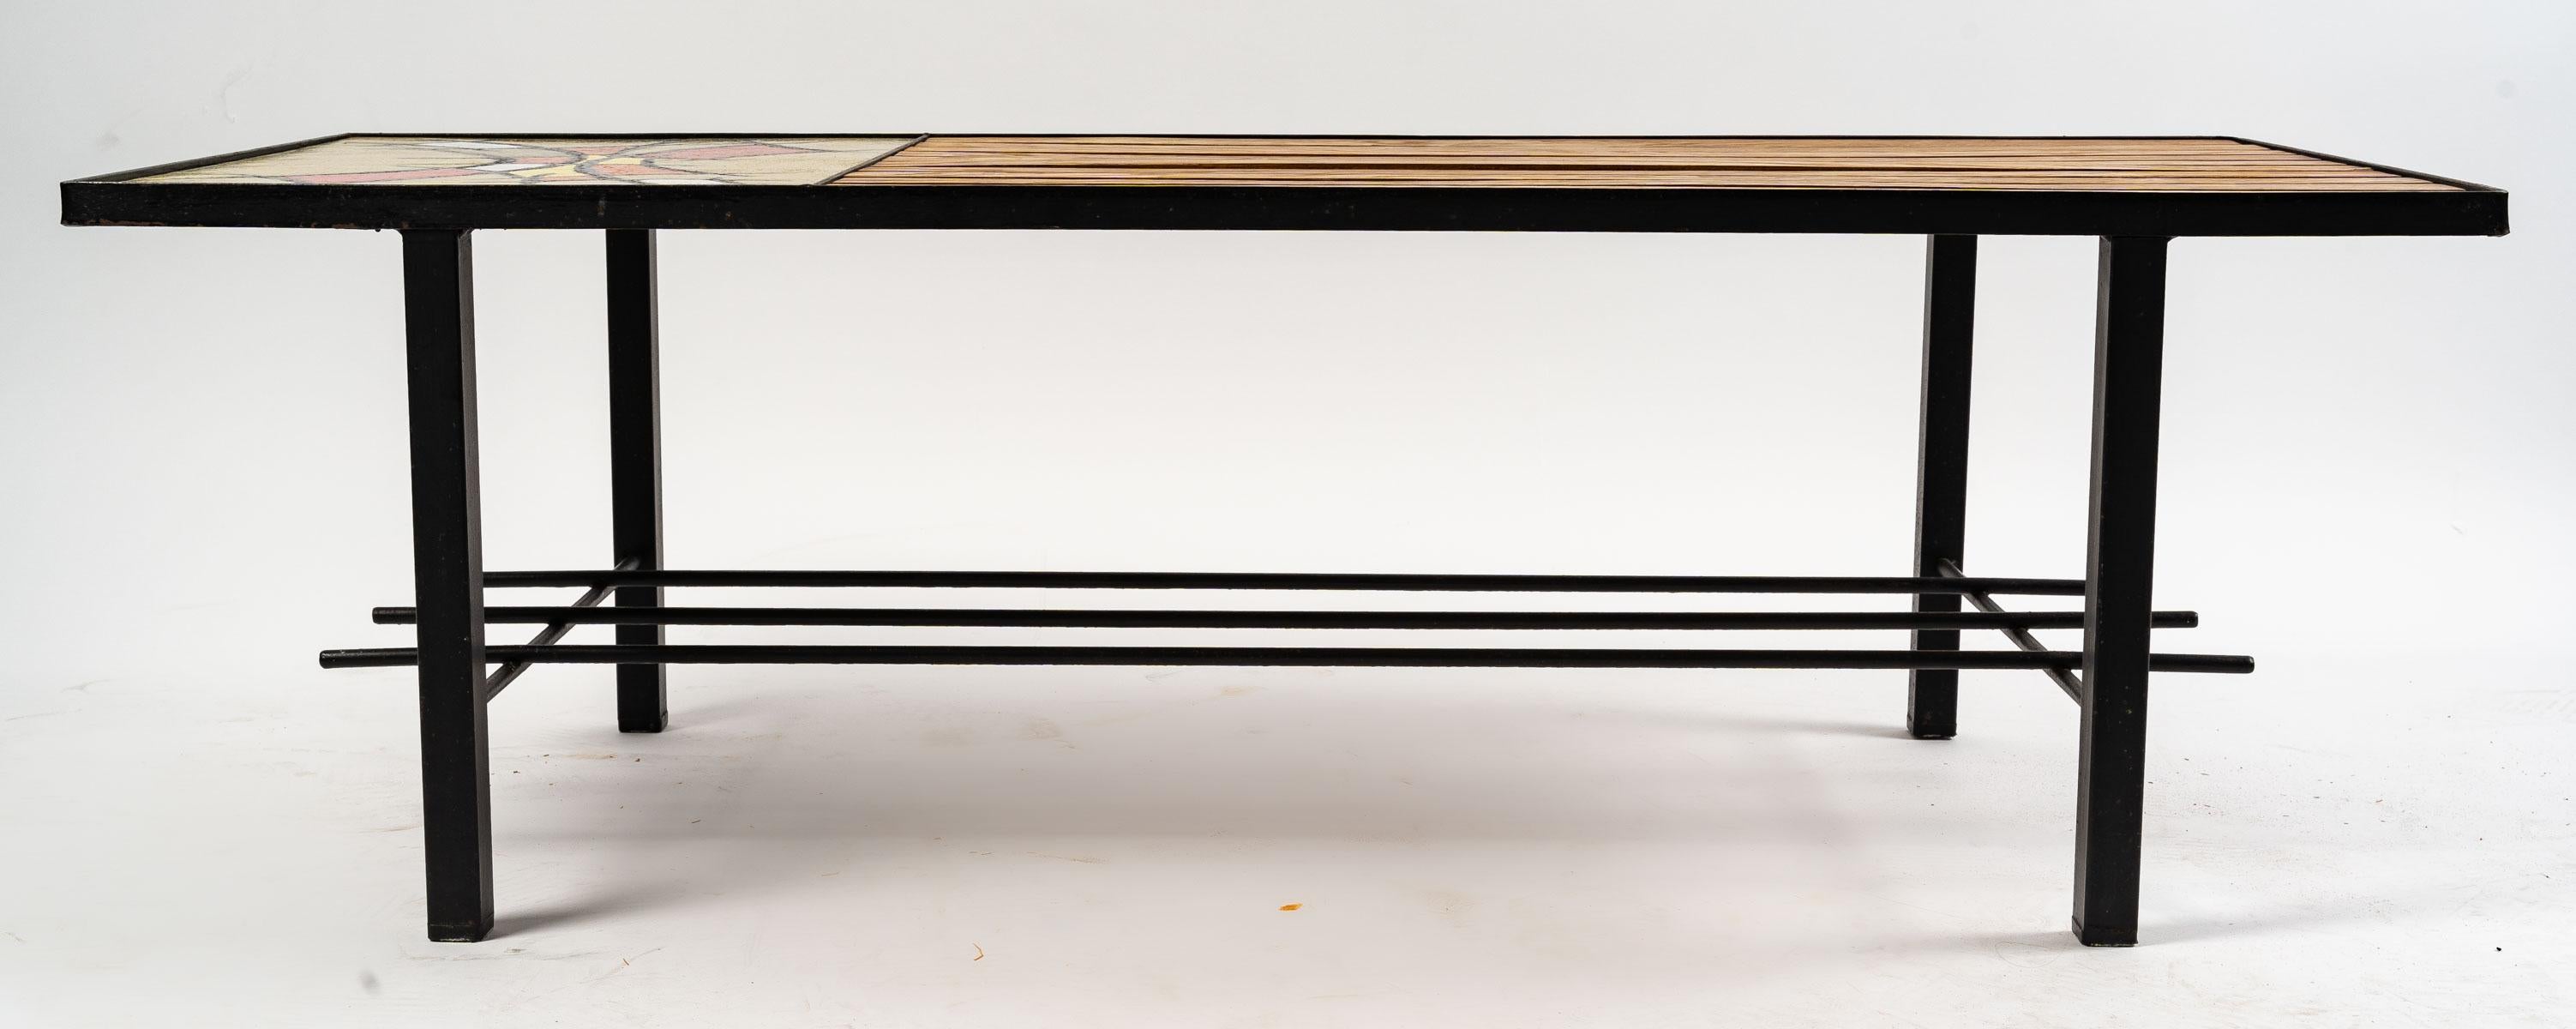 Wood and Ceramic Coffee Table, Design the 1960's-1970's 1